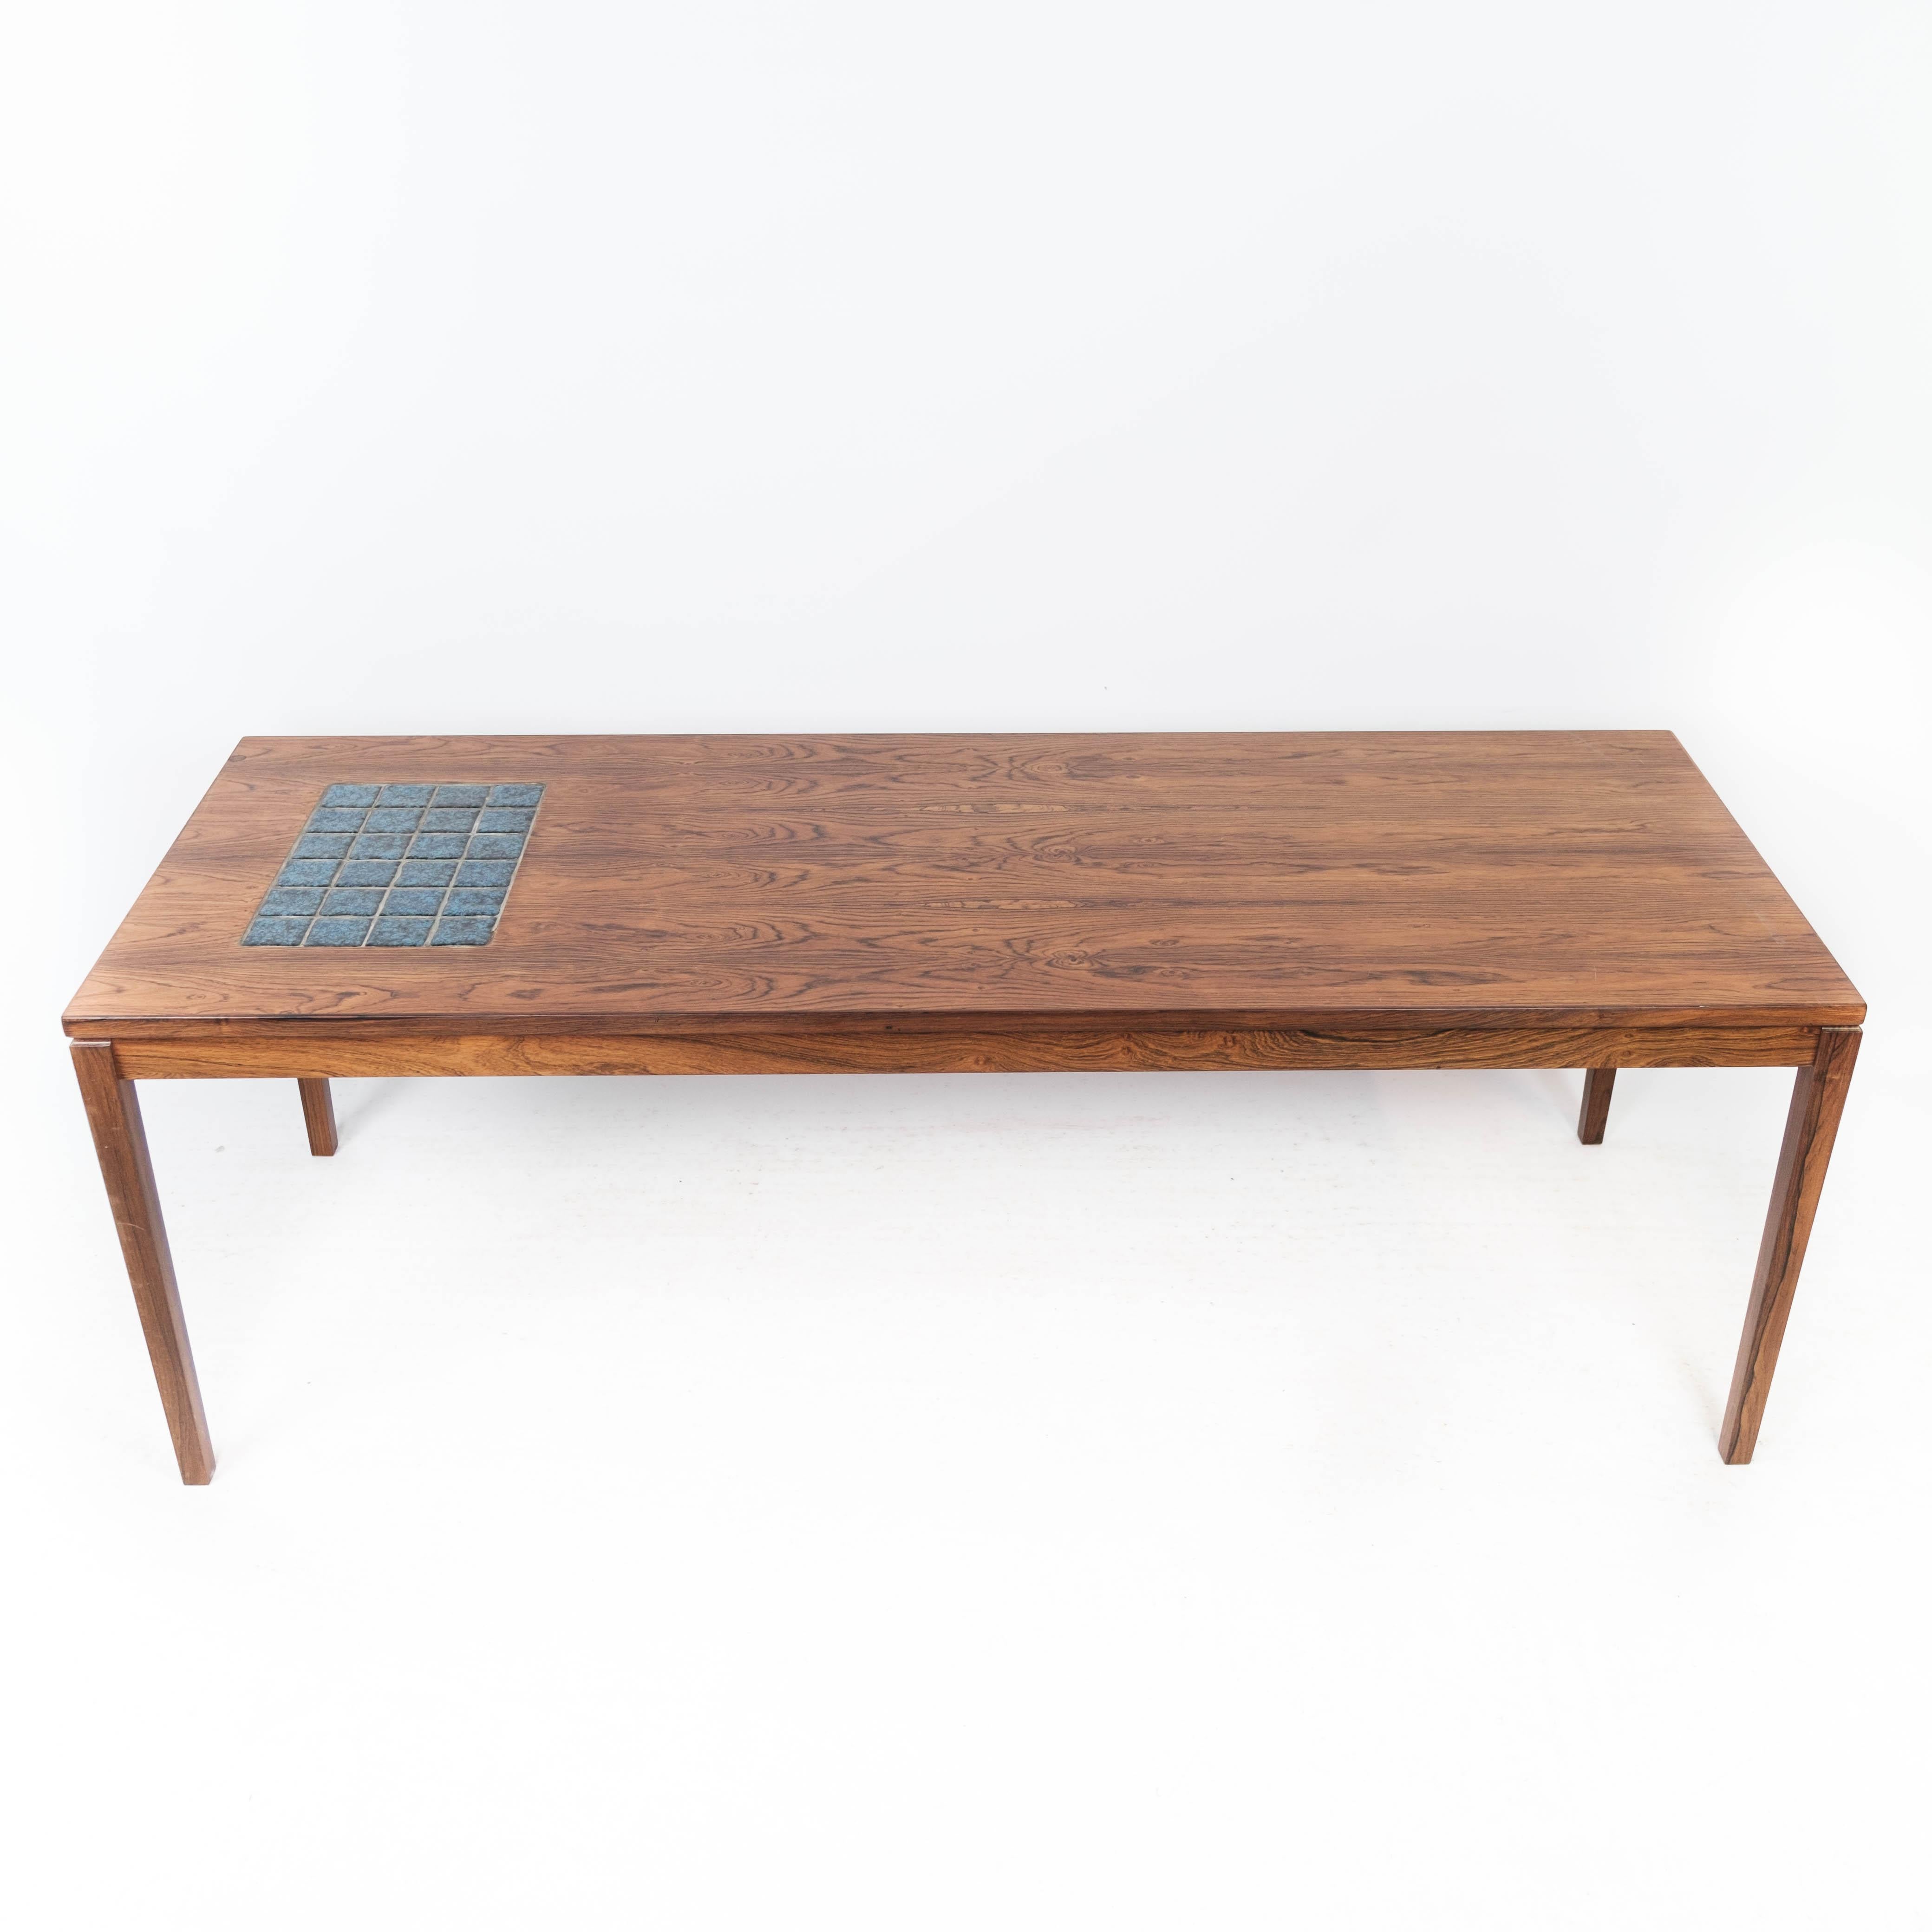 The coffee table in rosewood adorned with blue tiles is a stunning example of Danish design from the 1960s. Characterized by its sleek lines, elegant proportions, and exquisite craftsmanship, this coffee table captures the essence of mid-century